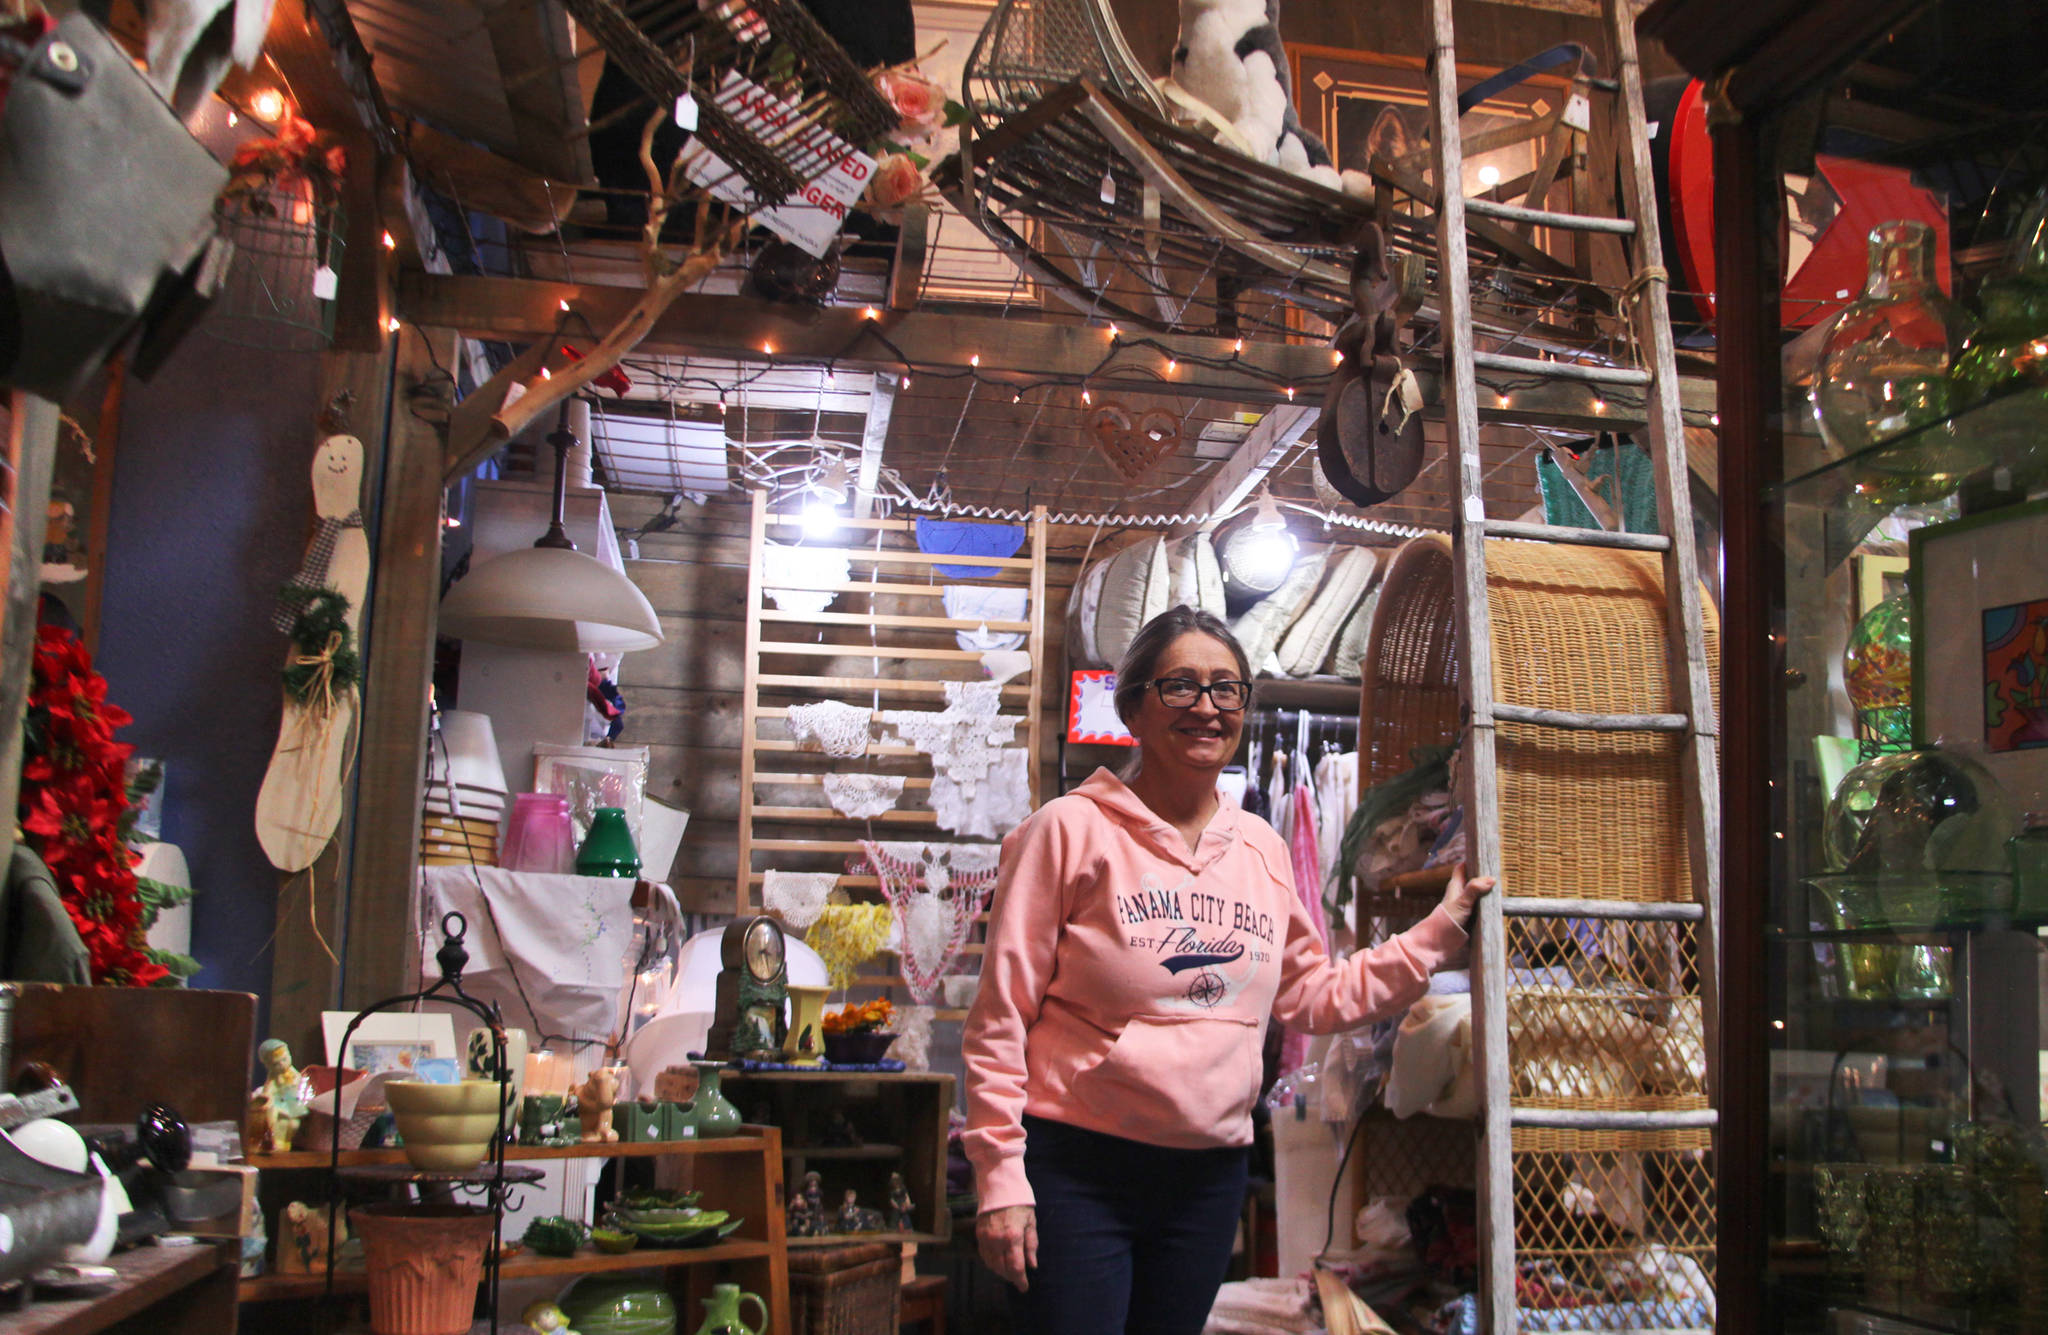 Owner Jeanie Carter of the Curiosity Shop poses among her merchandise on Monday, Nov. 27, 2017 in Kenai, Alaska. Like many small business owners in Kenai and Soldotna, Carter said the Thanksgiving weekend drew a lot of customers to her store, which offers gifts with local history that aren’t available in larger chain stores. (Ben Boettger/Peninsula Clarion)